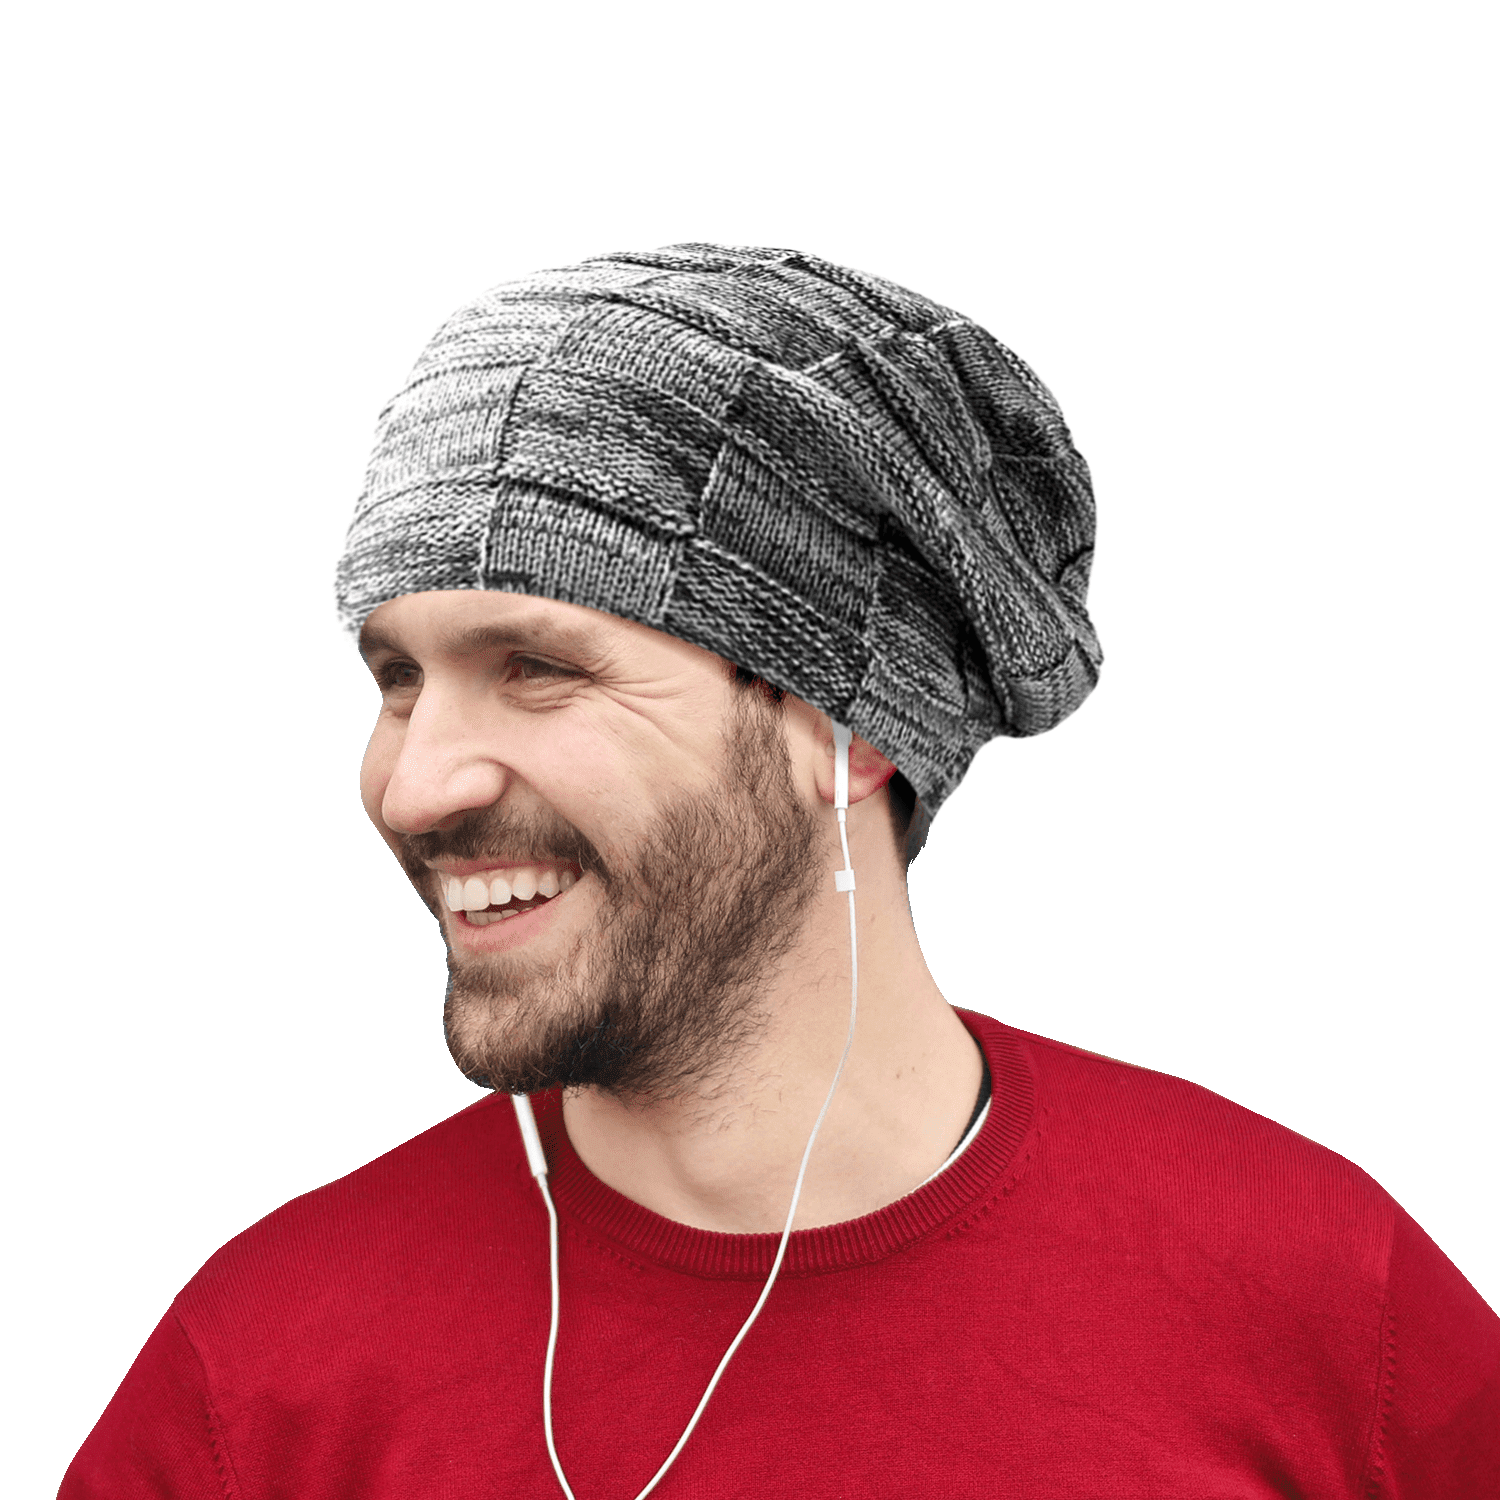 verband Onschuld Met andere bands Ambrose Slouchy Beanie for Men Winter Hats for Guys Cool Beanies Mens Lined  Knit Warm Knit Thick Binie Hat Ski Cap, One Size, Gray - Walmart.com